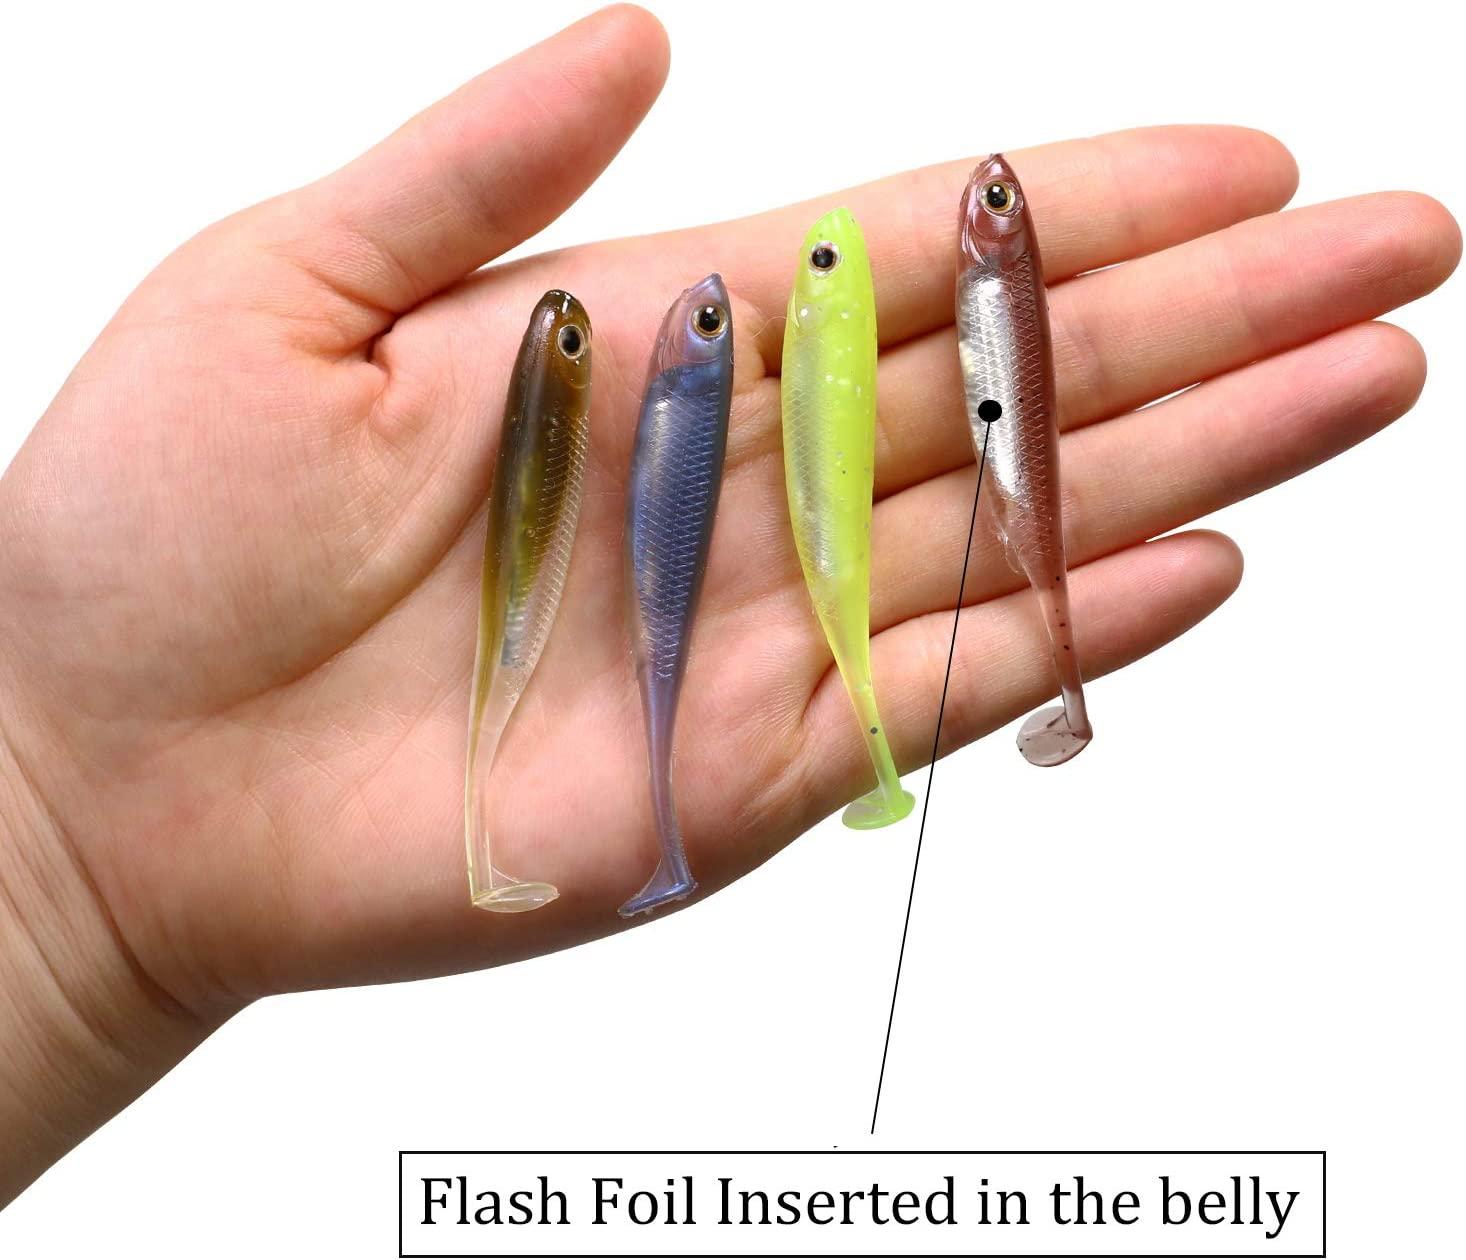 Soft Fishing Lures 6Pcs Pre-Rigged Jig Head Paddle Tail Soft Plastic  Swimbaits for Bass Trout Walleye Crappie Fishing Gear and Equipment for  Saltwater